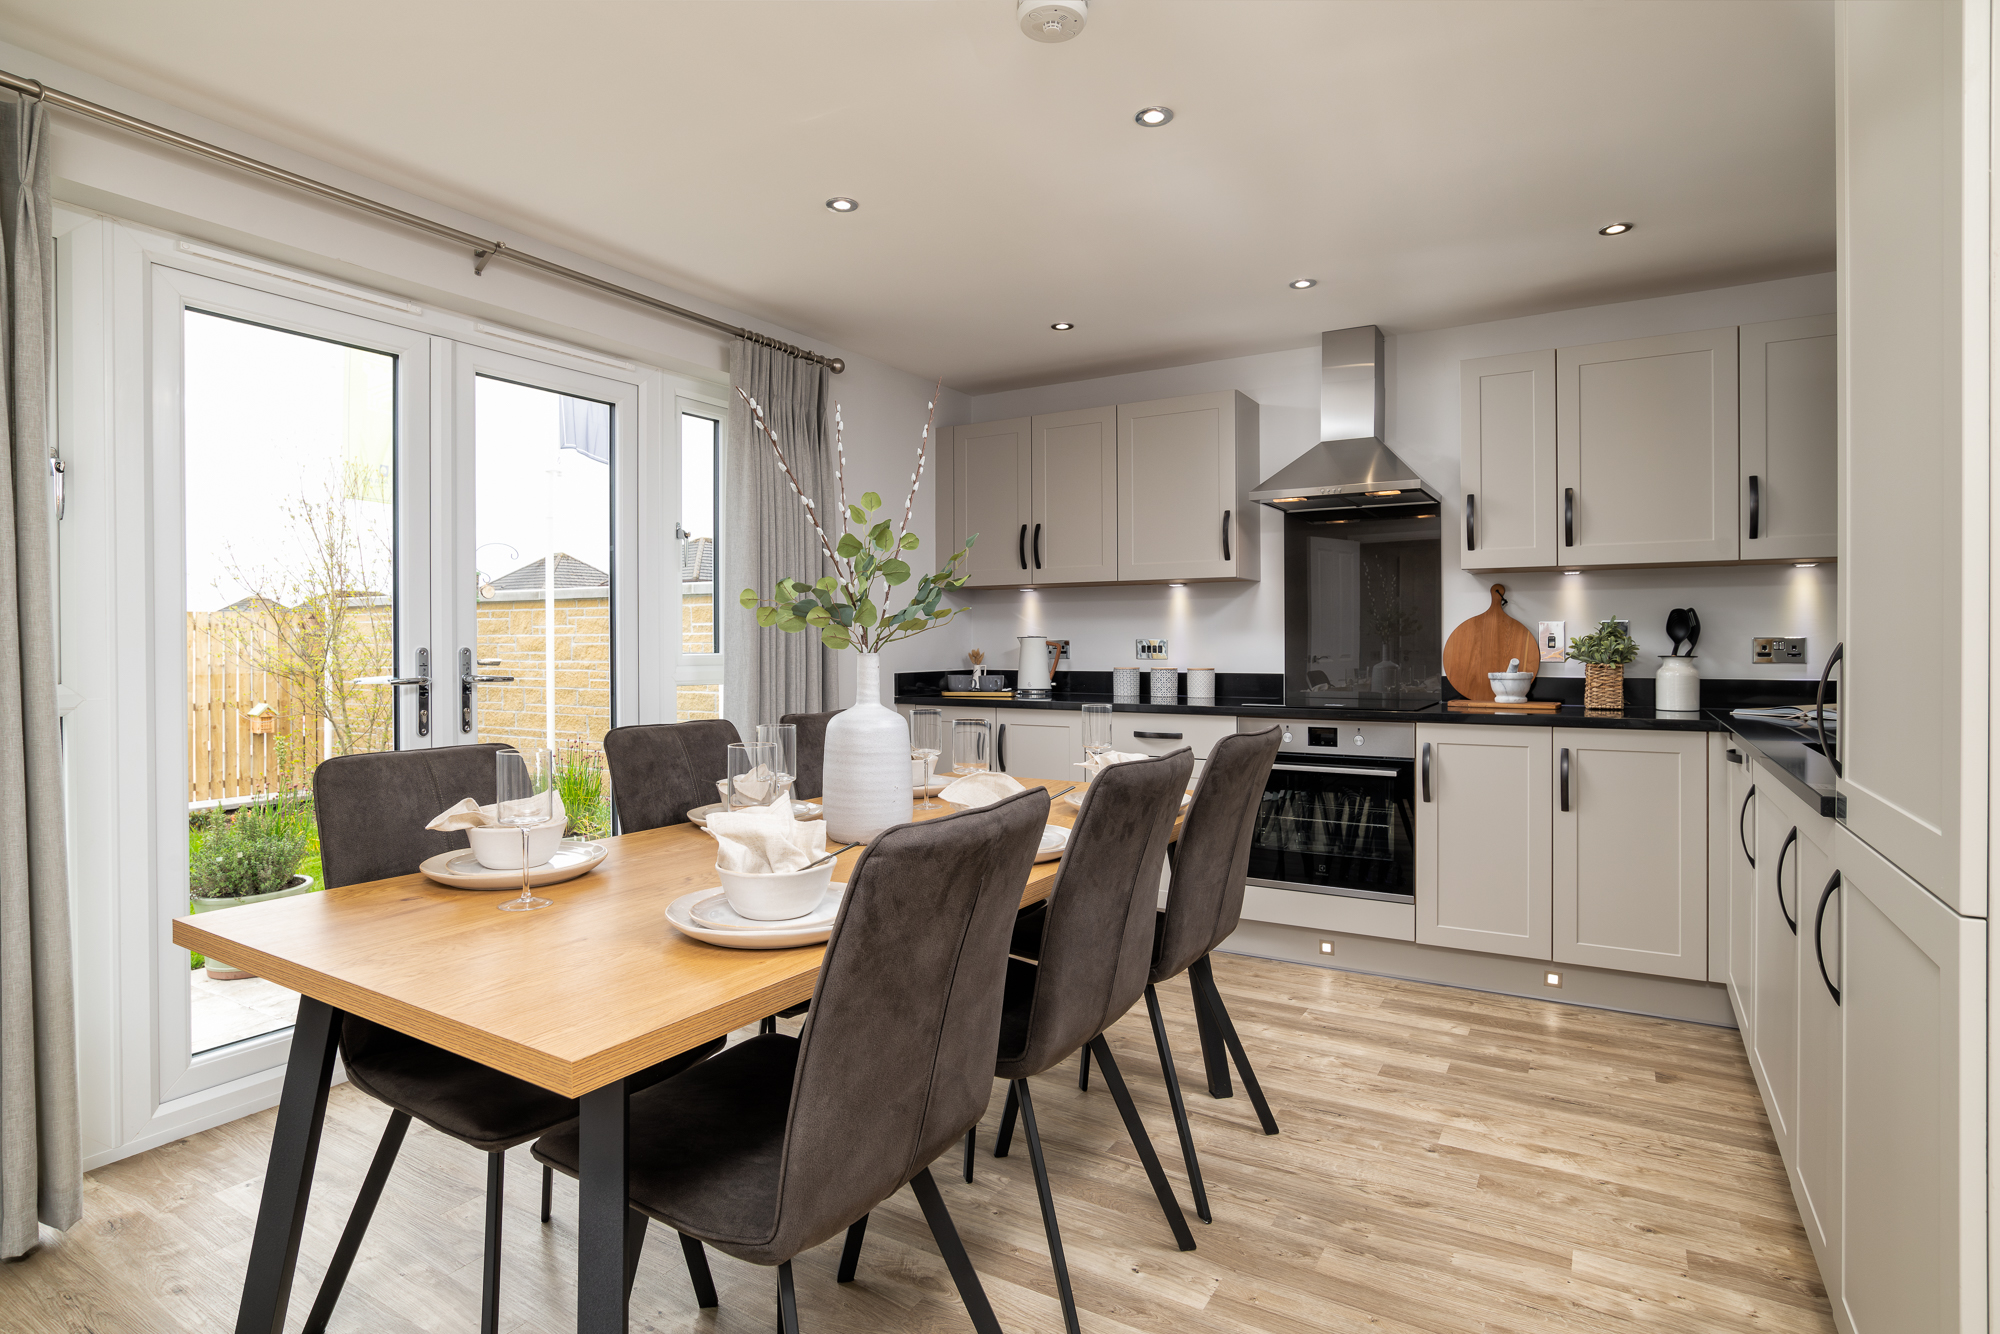 Property 3 of 9. Dean Show Home